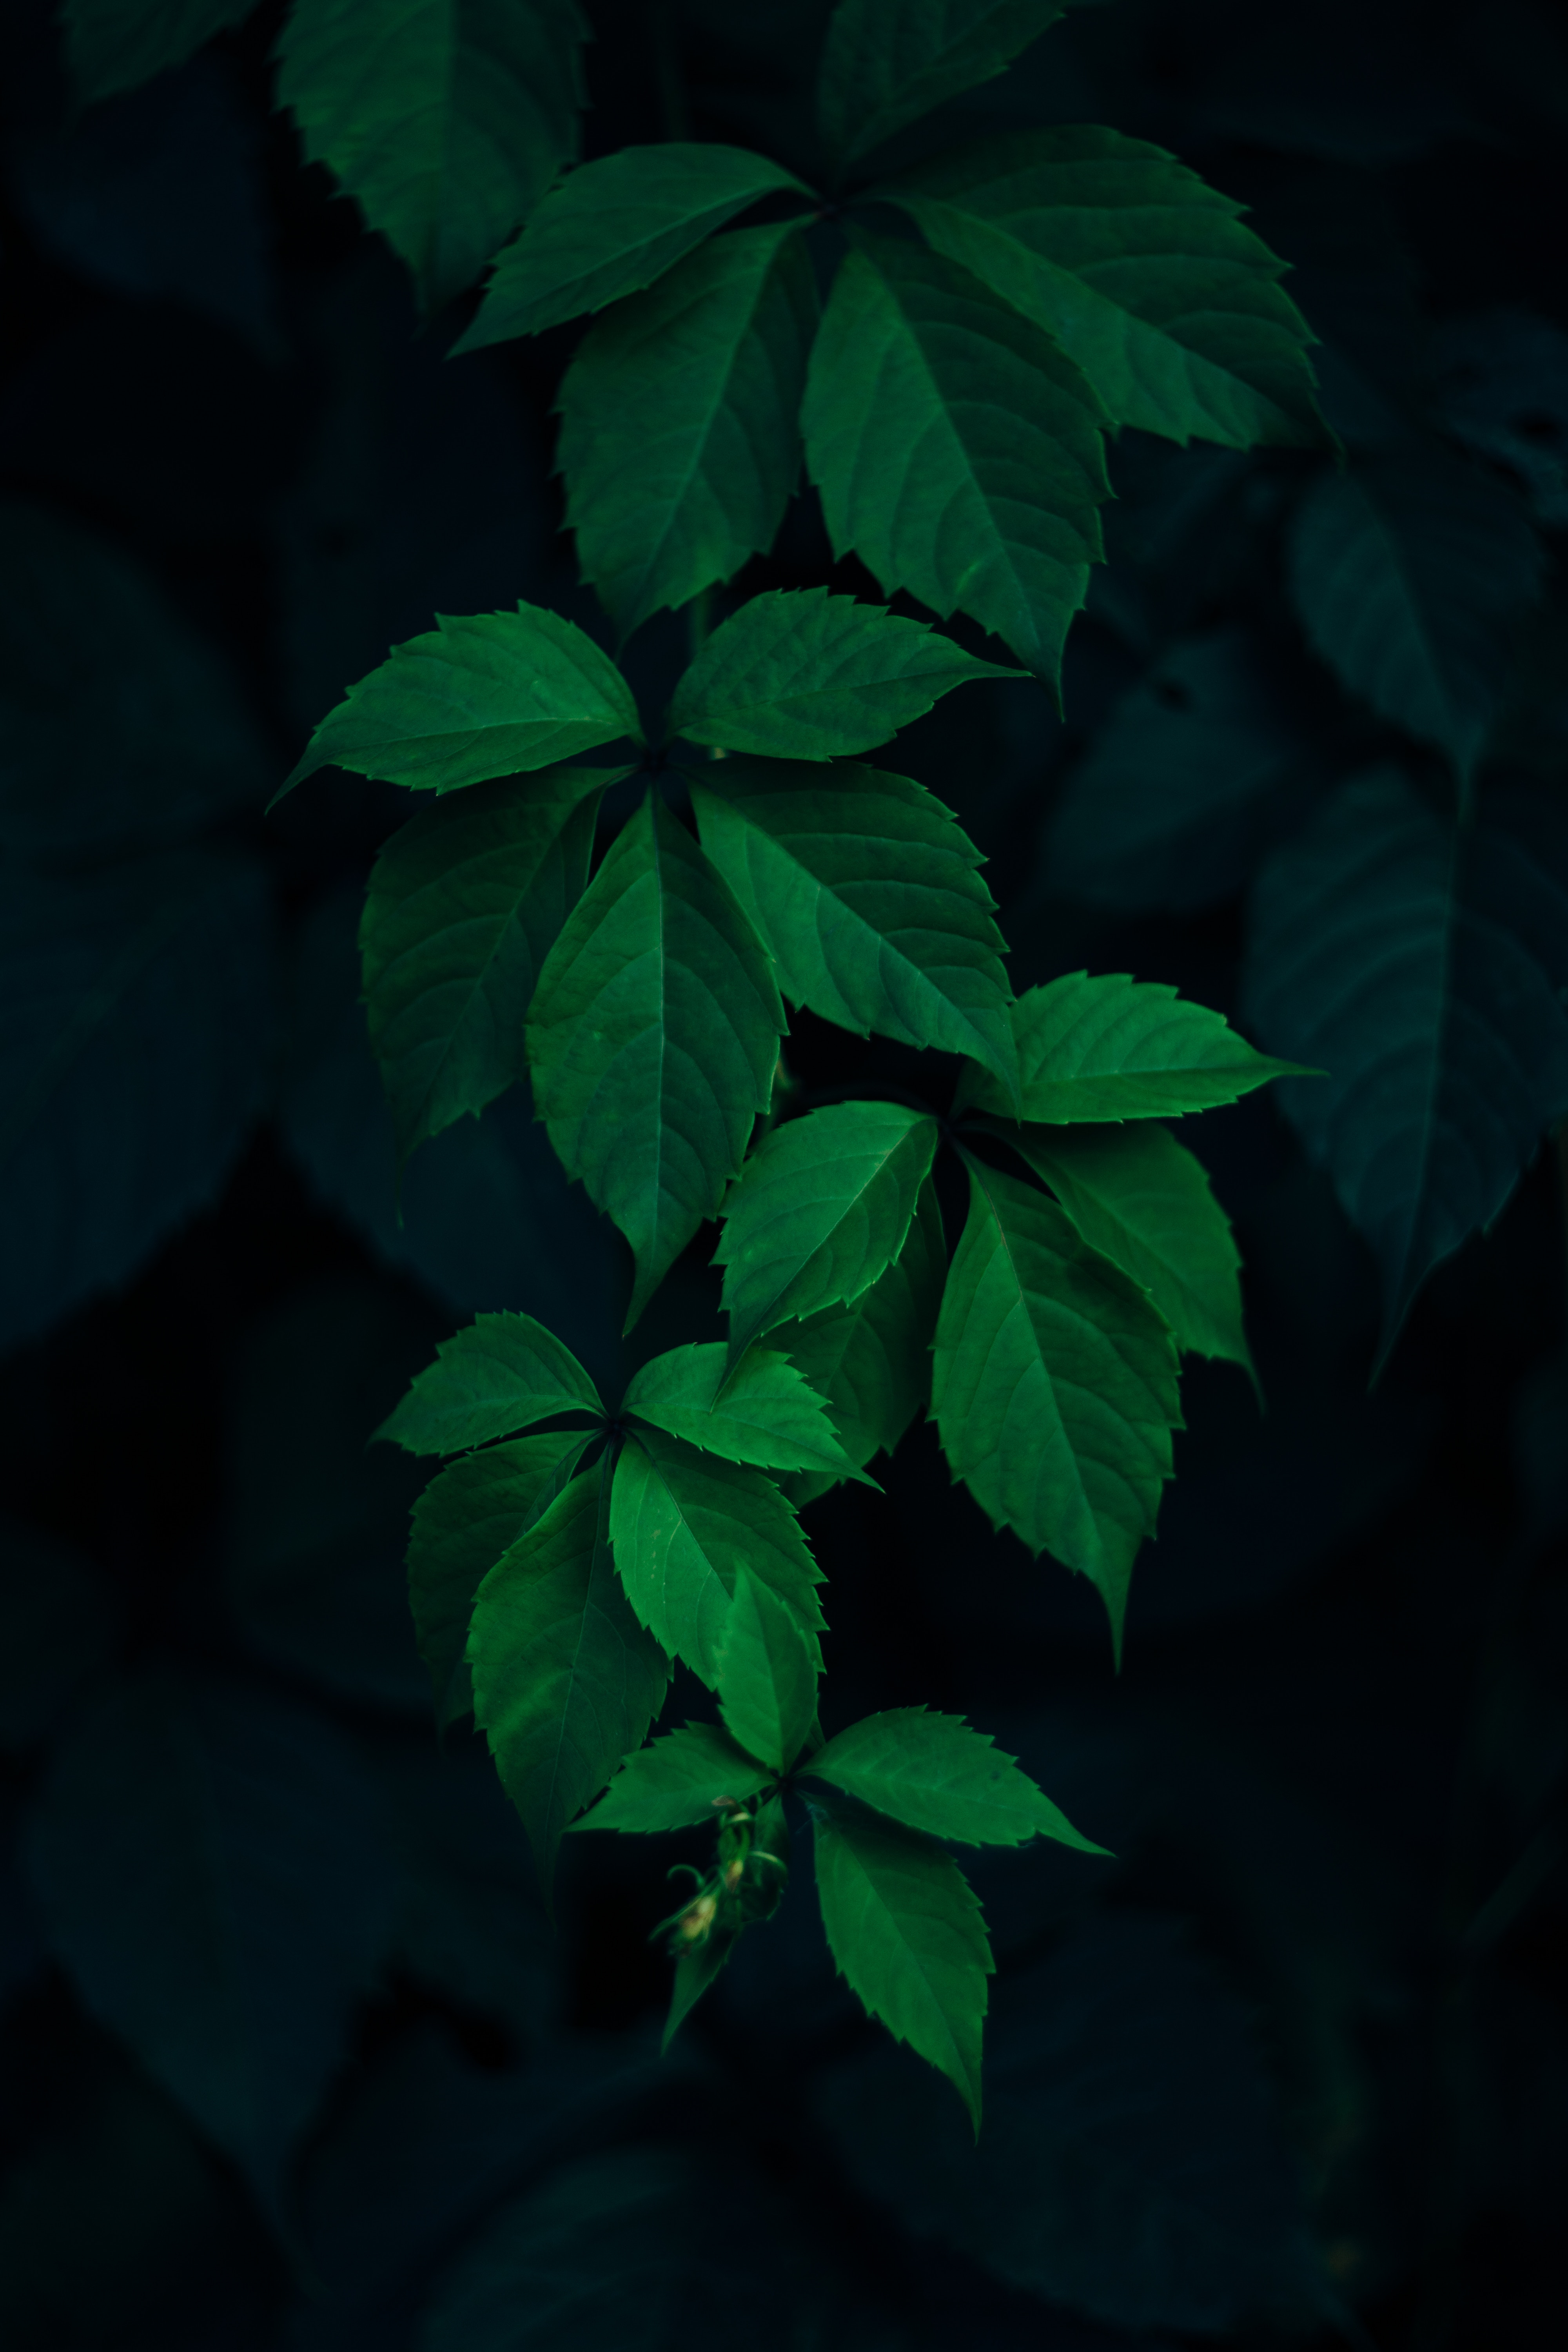 leaves, branches, green, dark background, nature 2160p